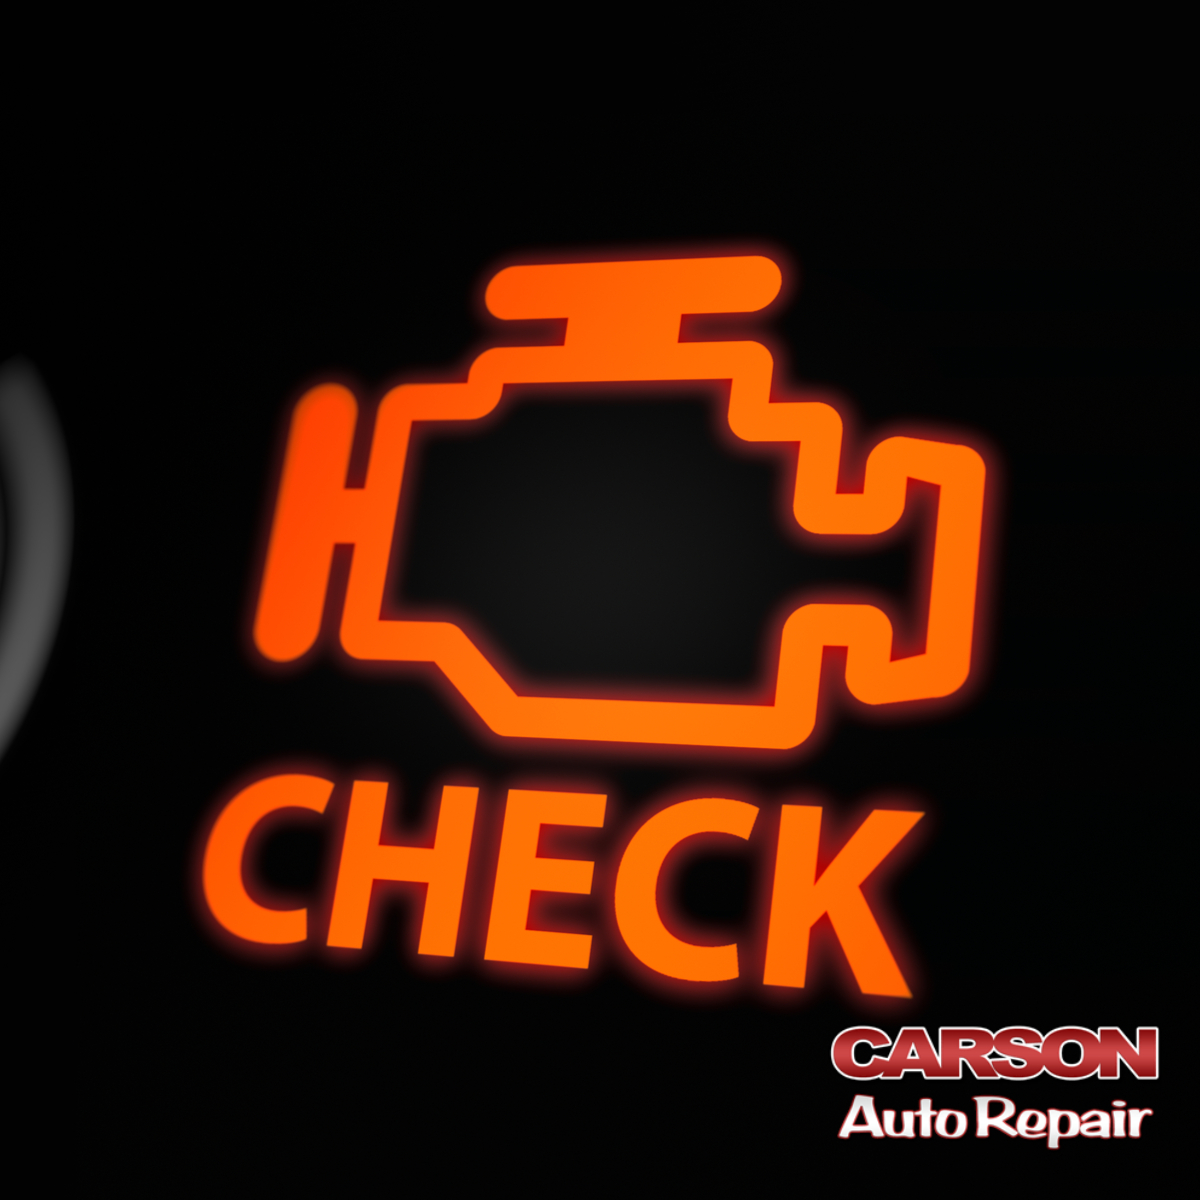 When Your Car’s Acting Up, Call for Inspection, Diagnosis, and Fixes!